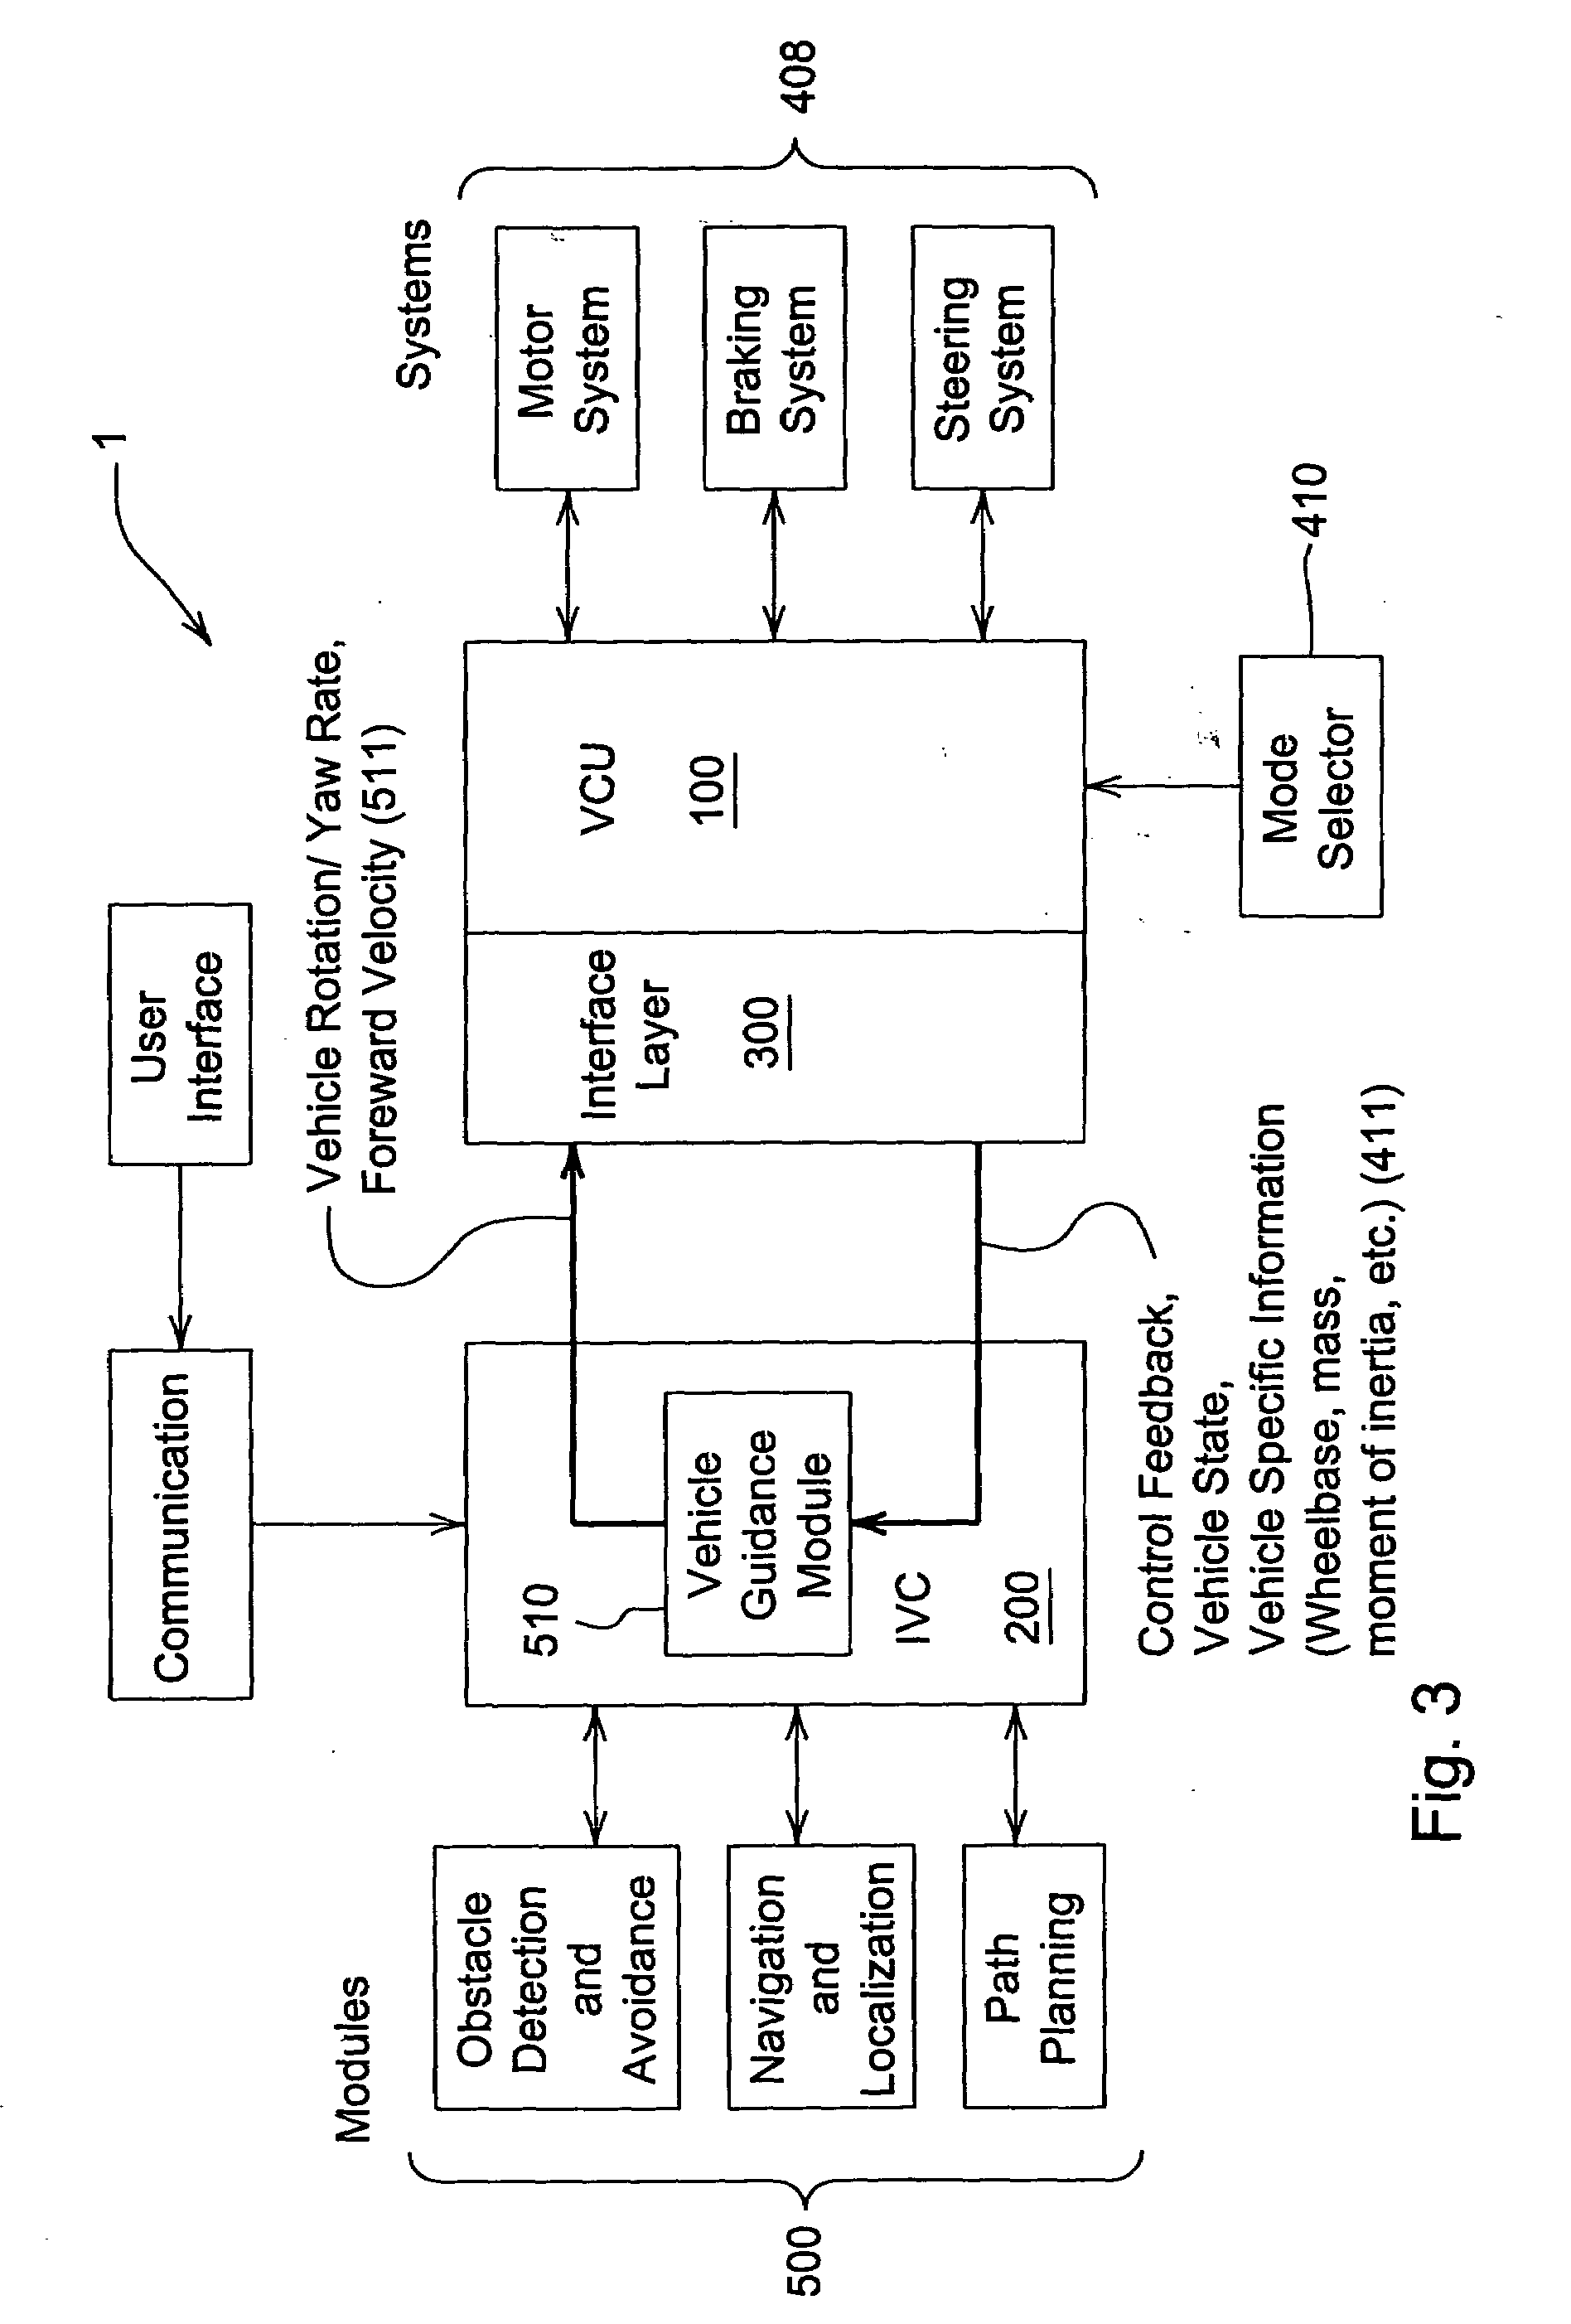 Multiple mode system with multiple controllers